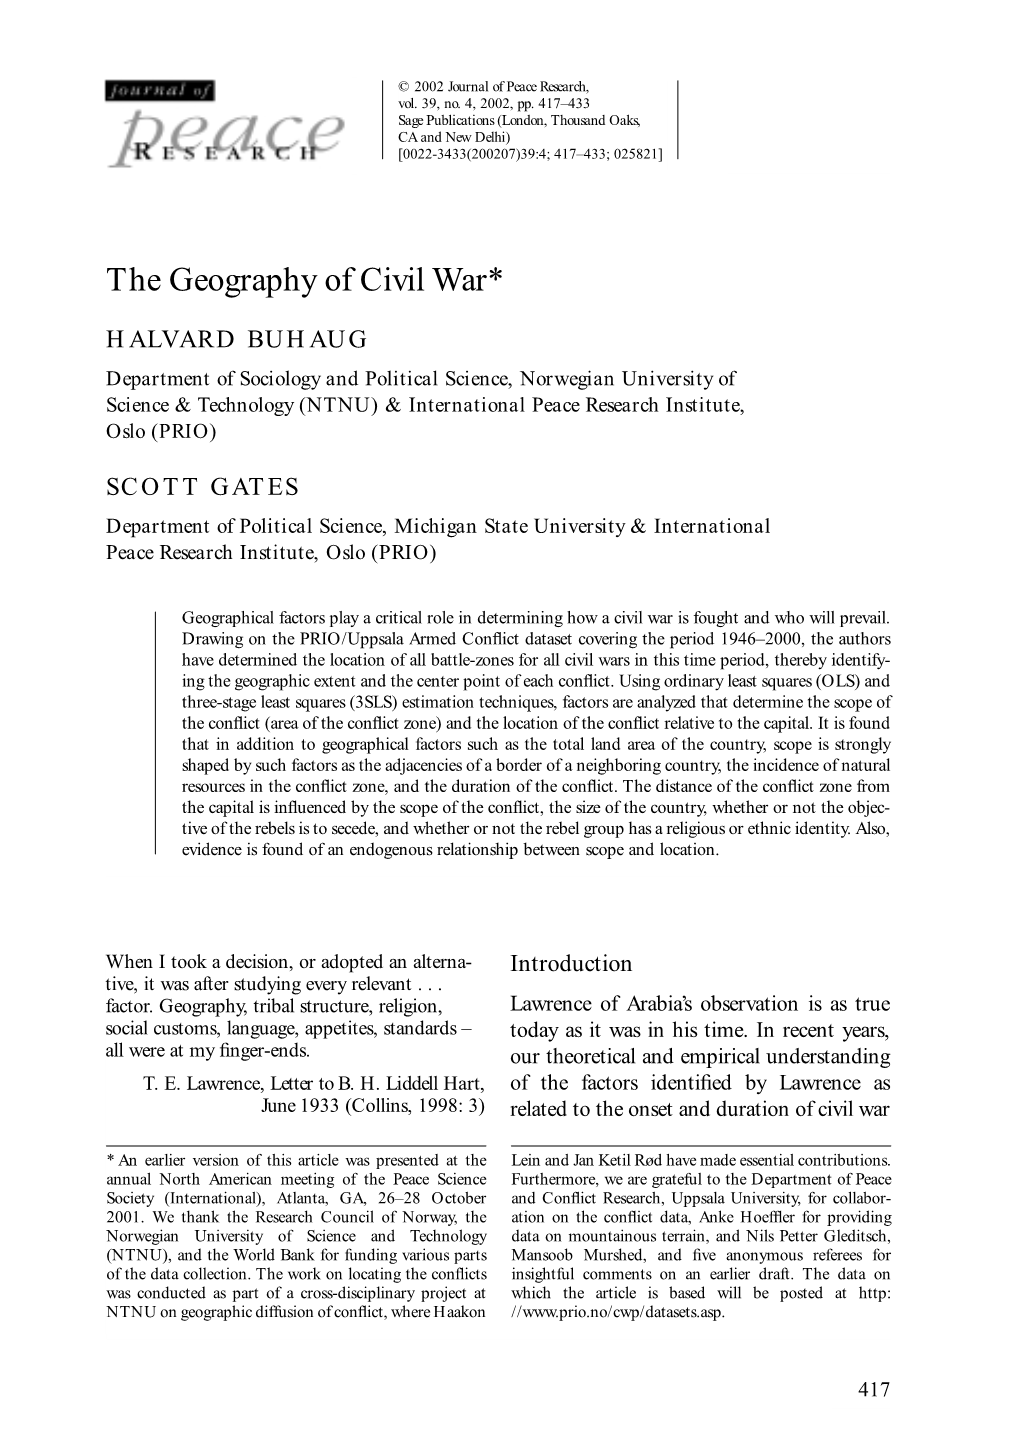 The Geography of Civil War*